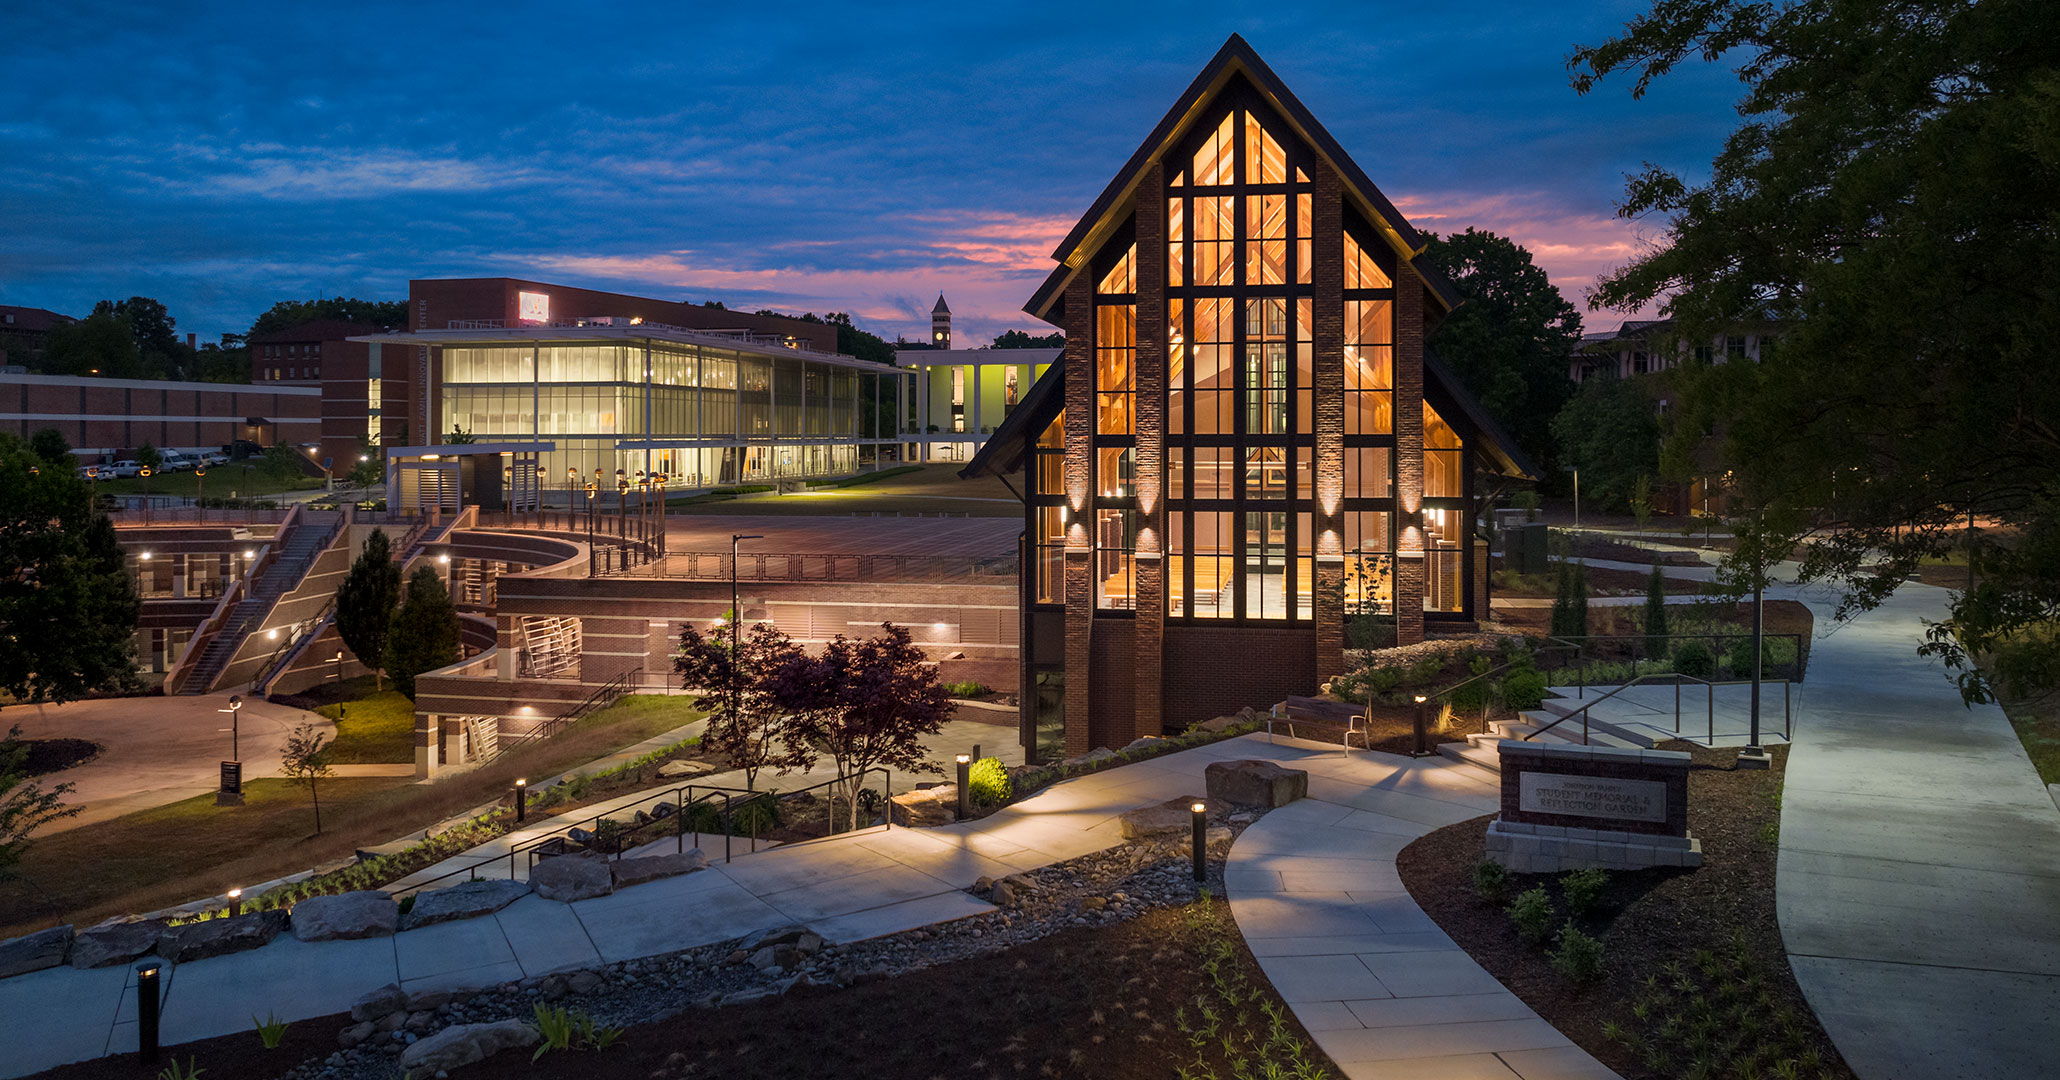 Clemson University worked with BOUDREAUX architects to design a new campus chapel.